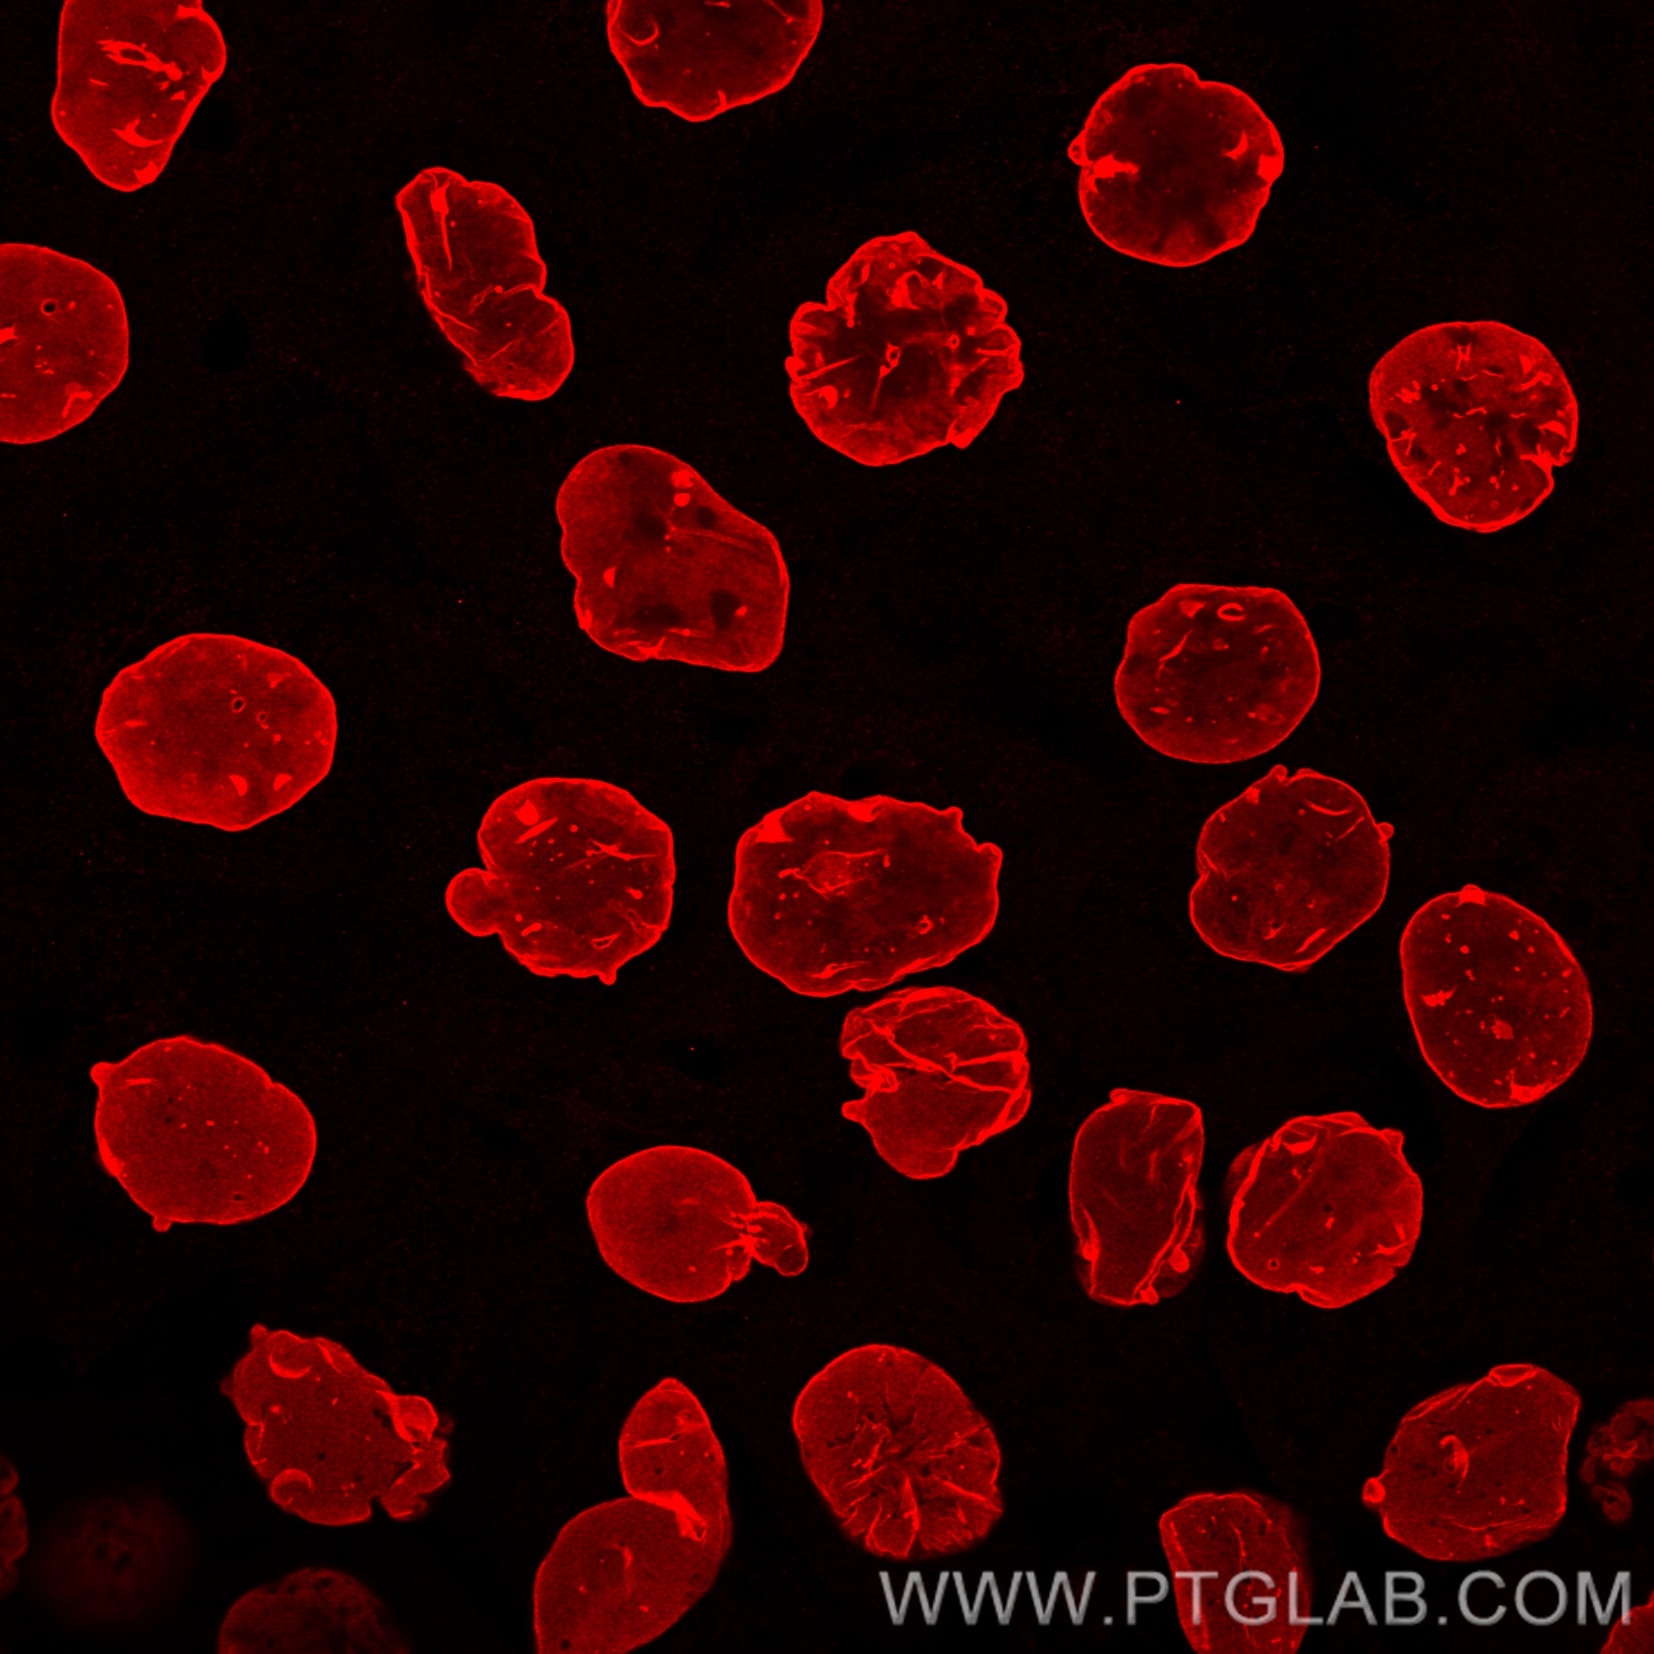 Immunofluorescence analysis of A431 cells stained with rabbit anti-Lamin B1 antibody (12987-1-AP, red) and Nano-Secondary® alpaca anti-rabbit IgG, recombinant VHH, CoraLite® Plus 555 (srb2GCL555-1), 1:500. Nuclei were stained with DAPI. Images were recorded at the Core Facility Bioimaging at the Biomedical Center, LMU Munich.